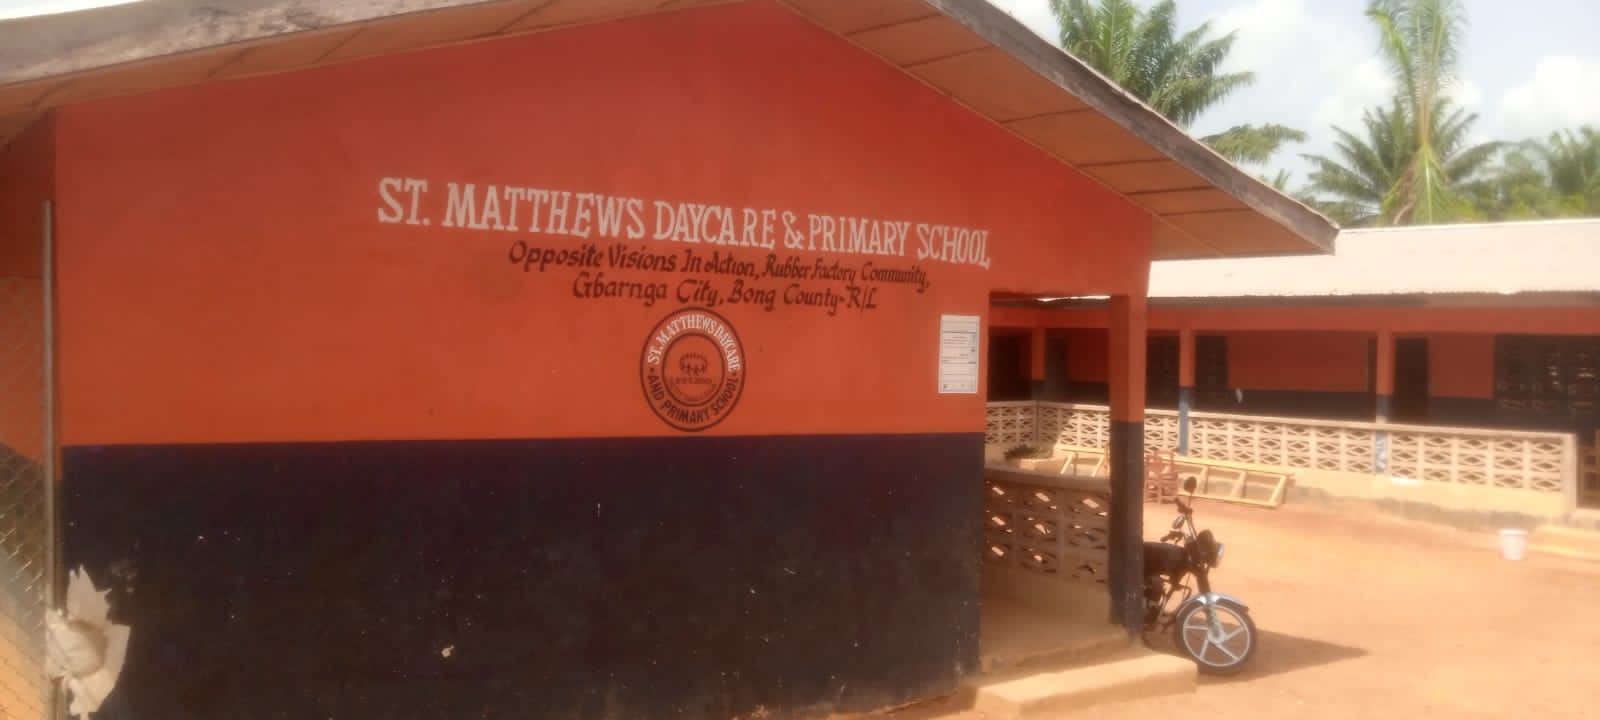 St. Matthews Daycare and Primary School